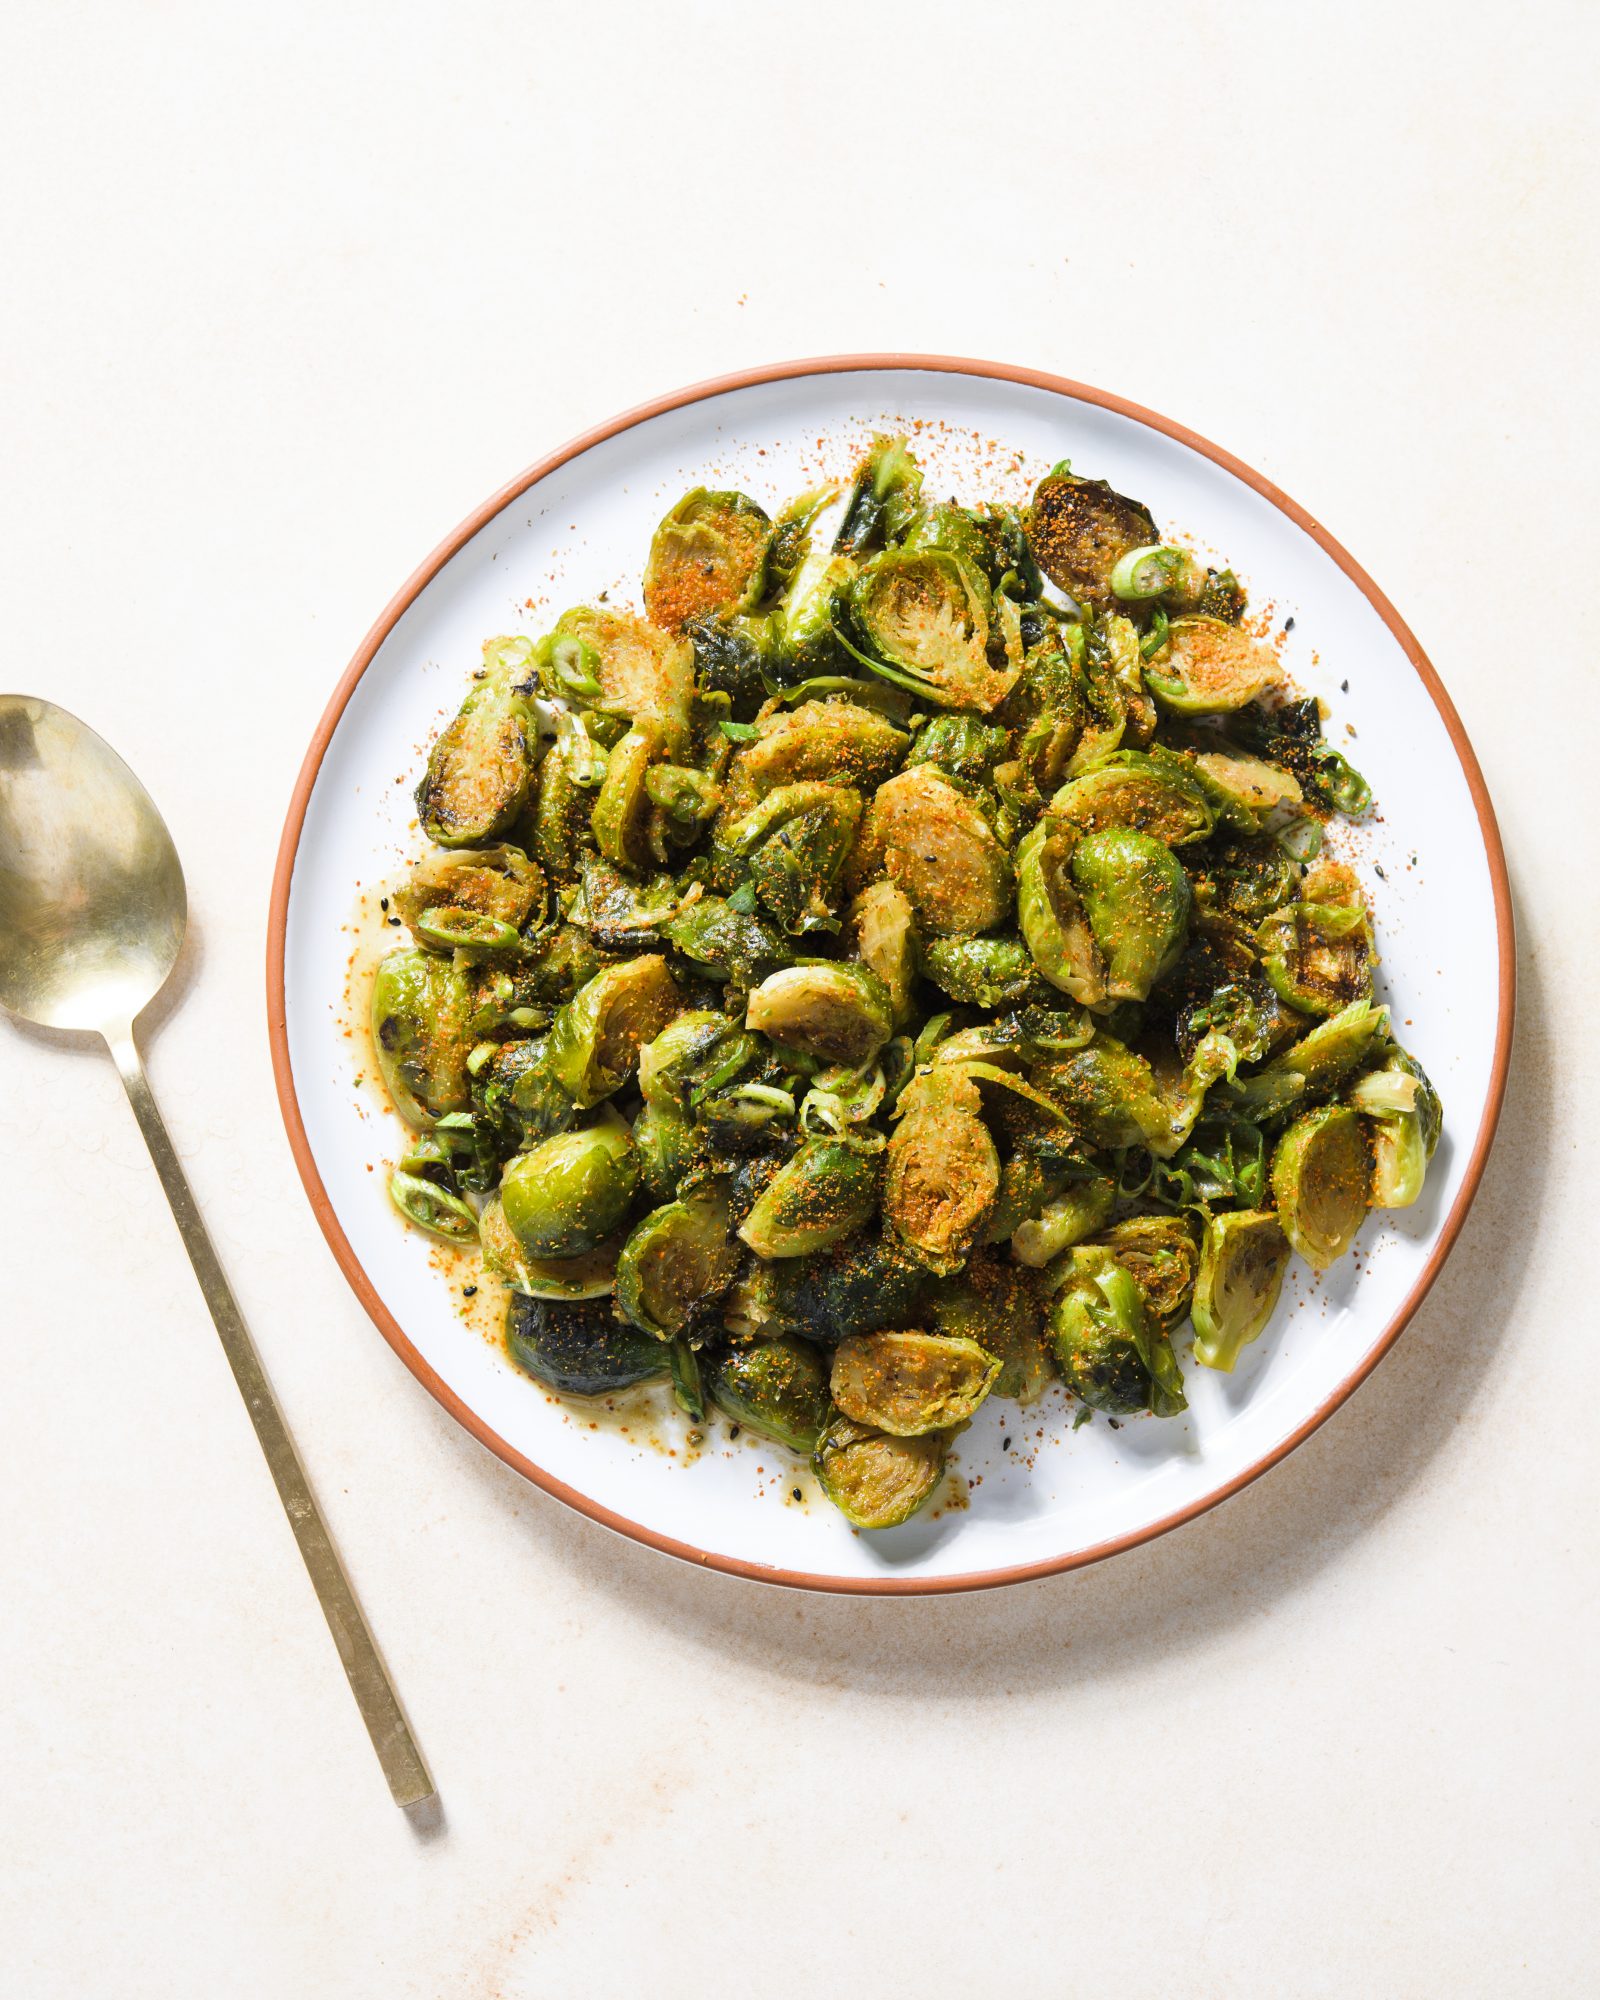 Soy glazed braised brussels sprouts v